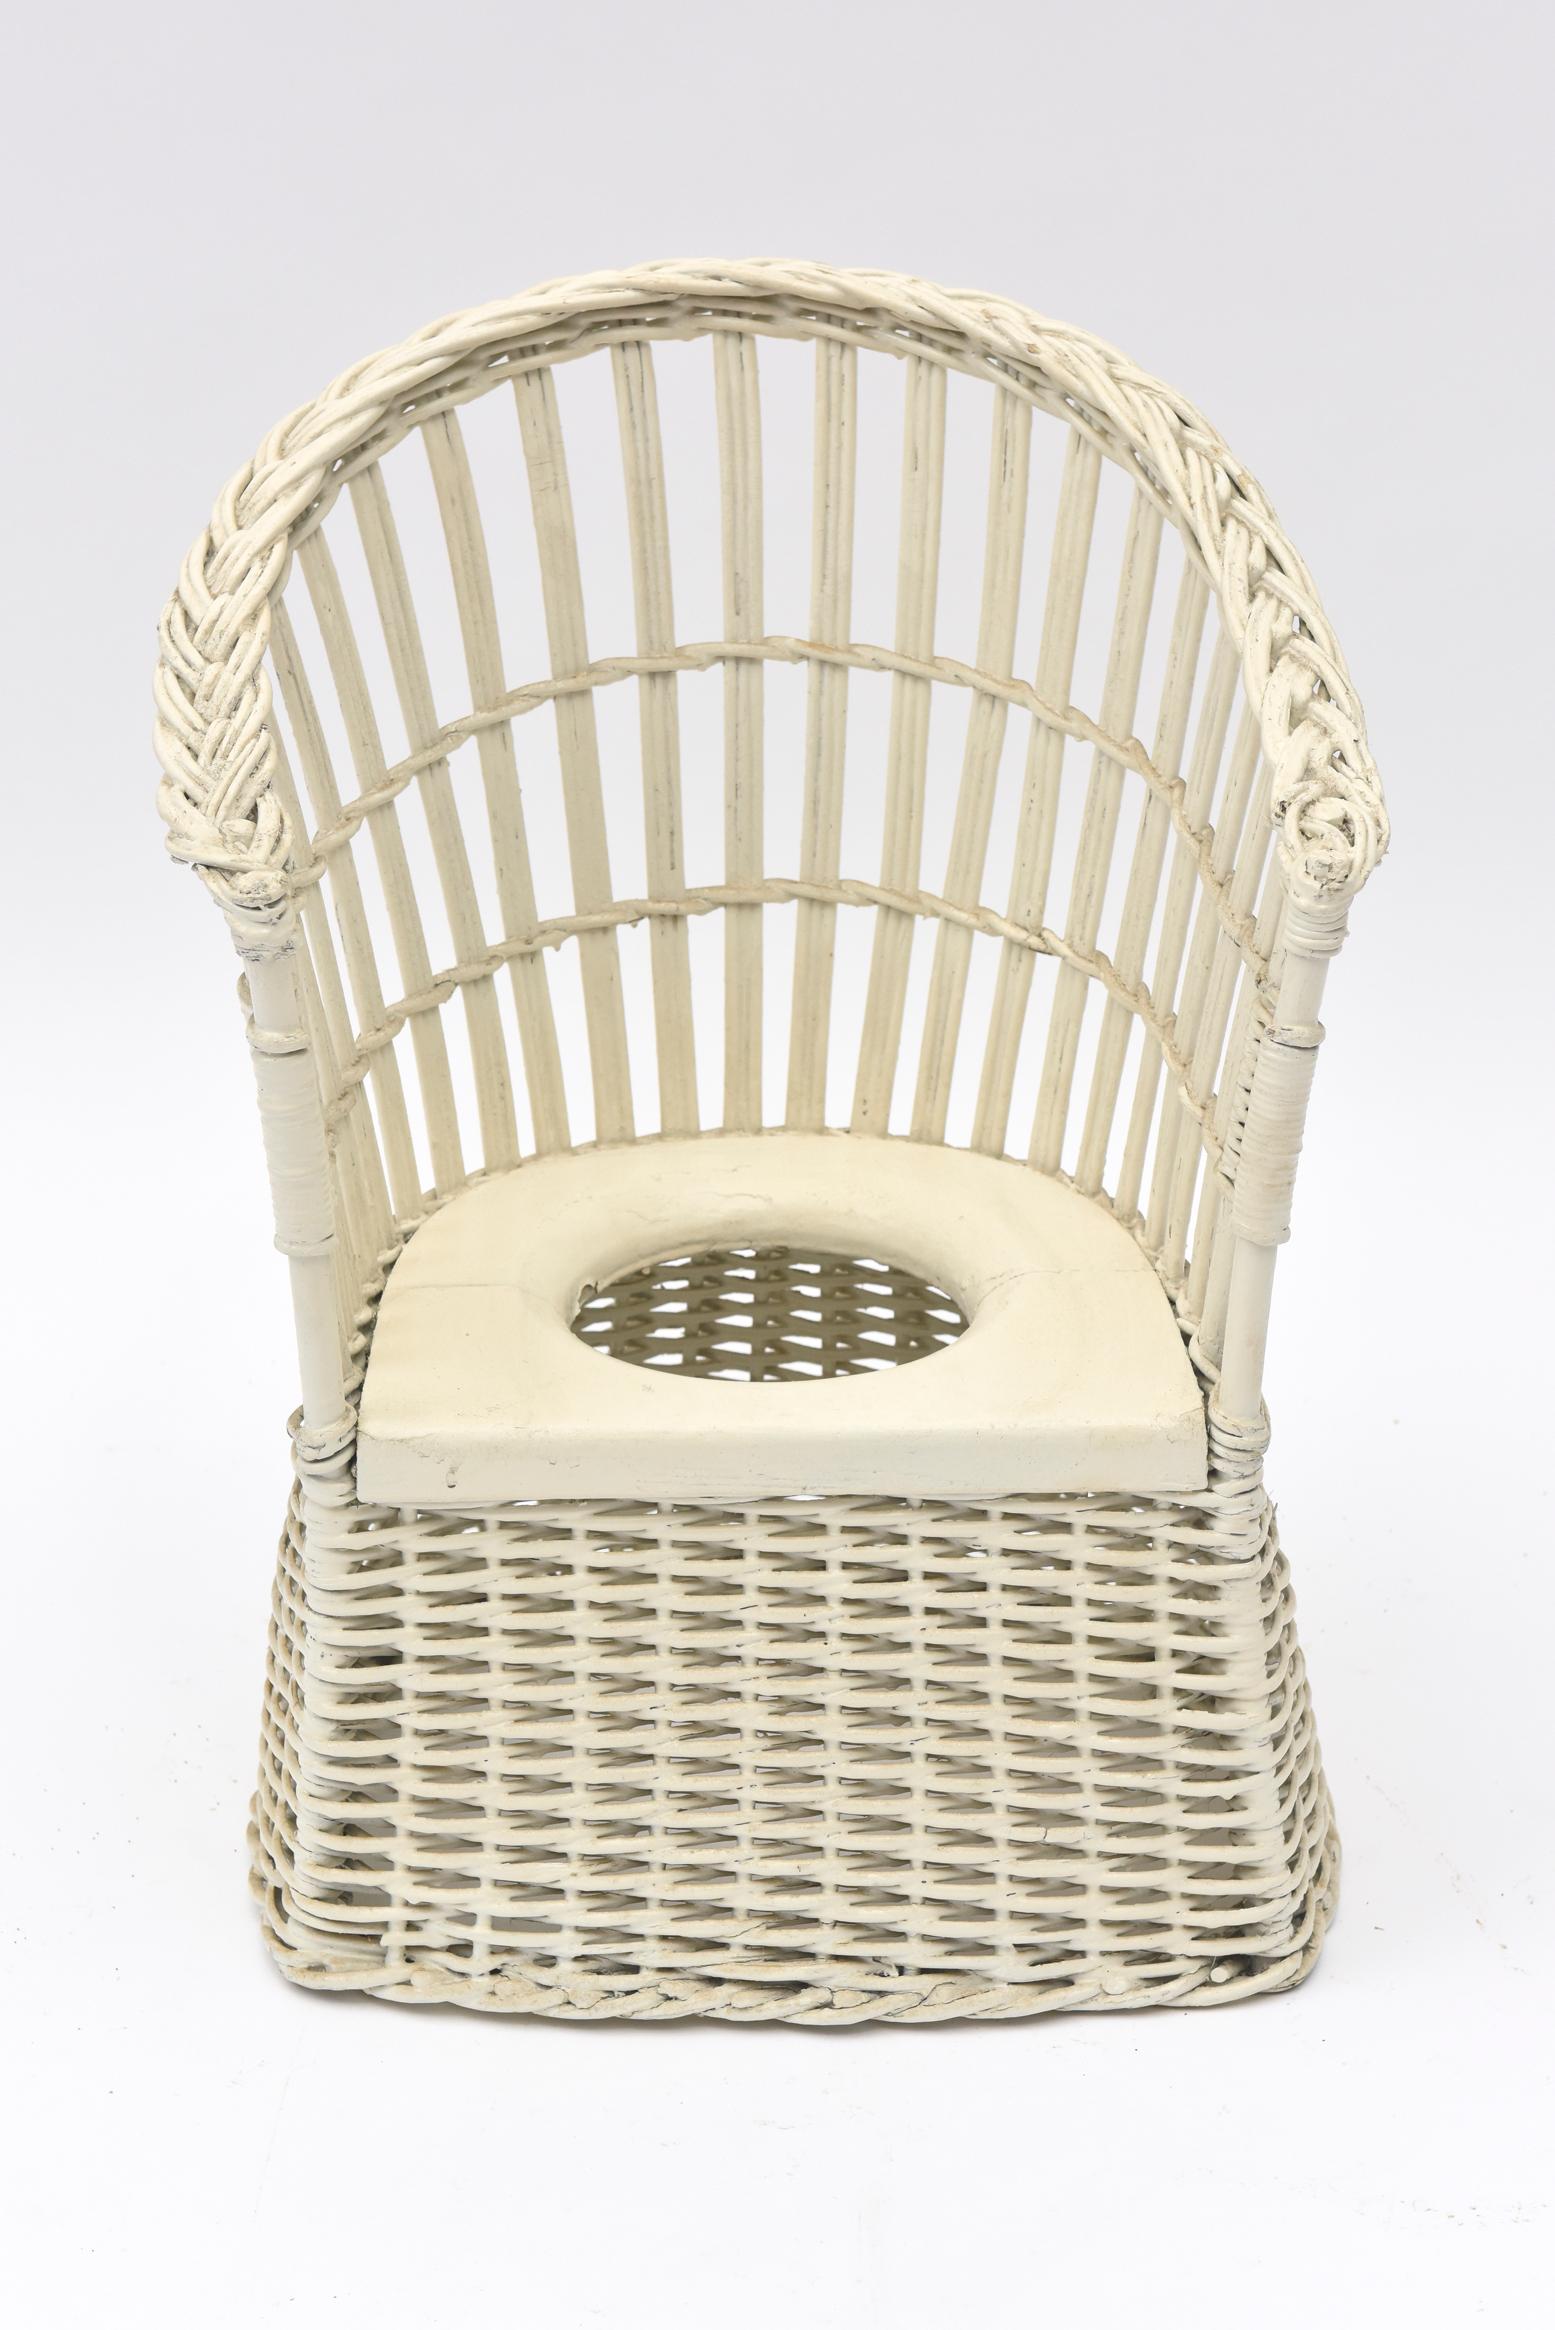 Painted white, this wicker potty seat is all about the early to mid-20th century when wicker was all the rage for nurseries. Although the original pot to catch the child's urine, etc., is missing, a newer larger pot can be easily found. The base of